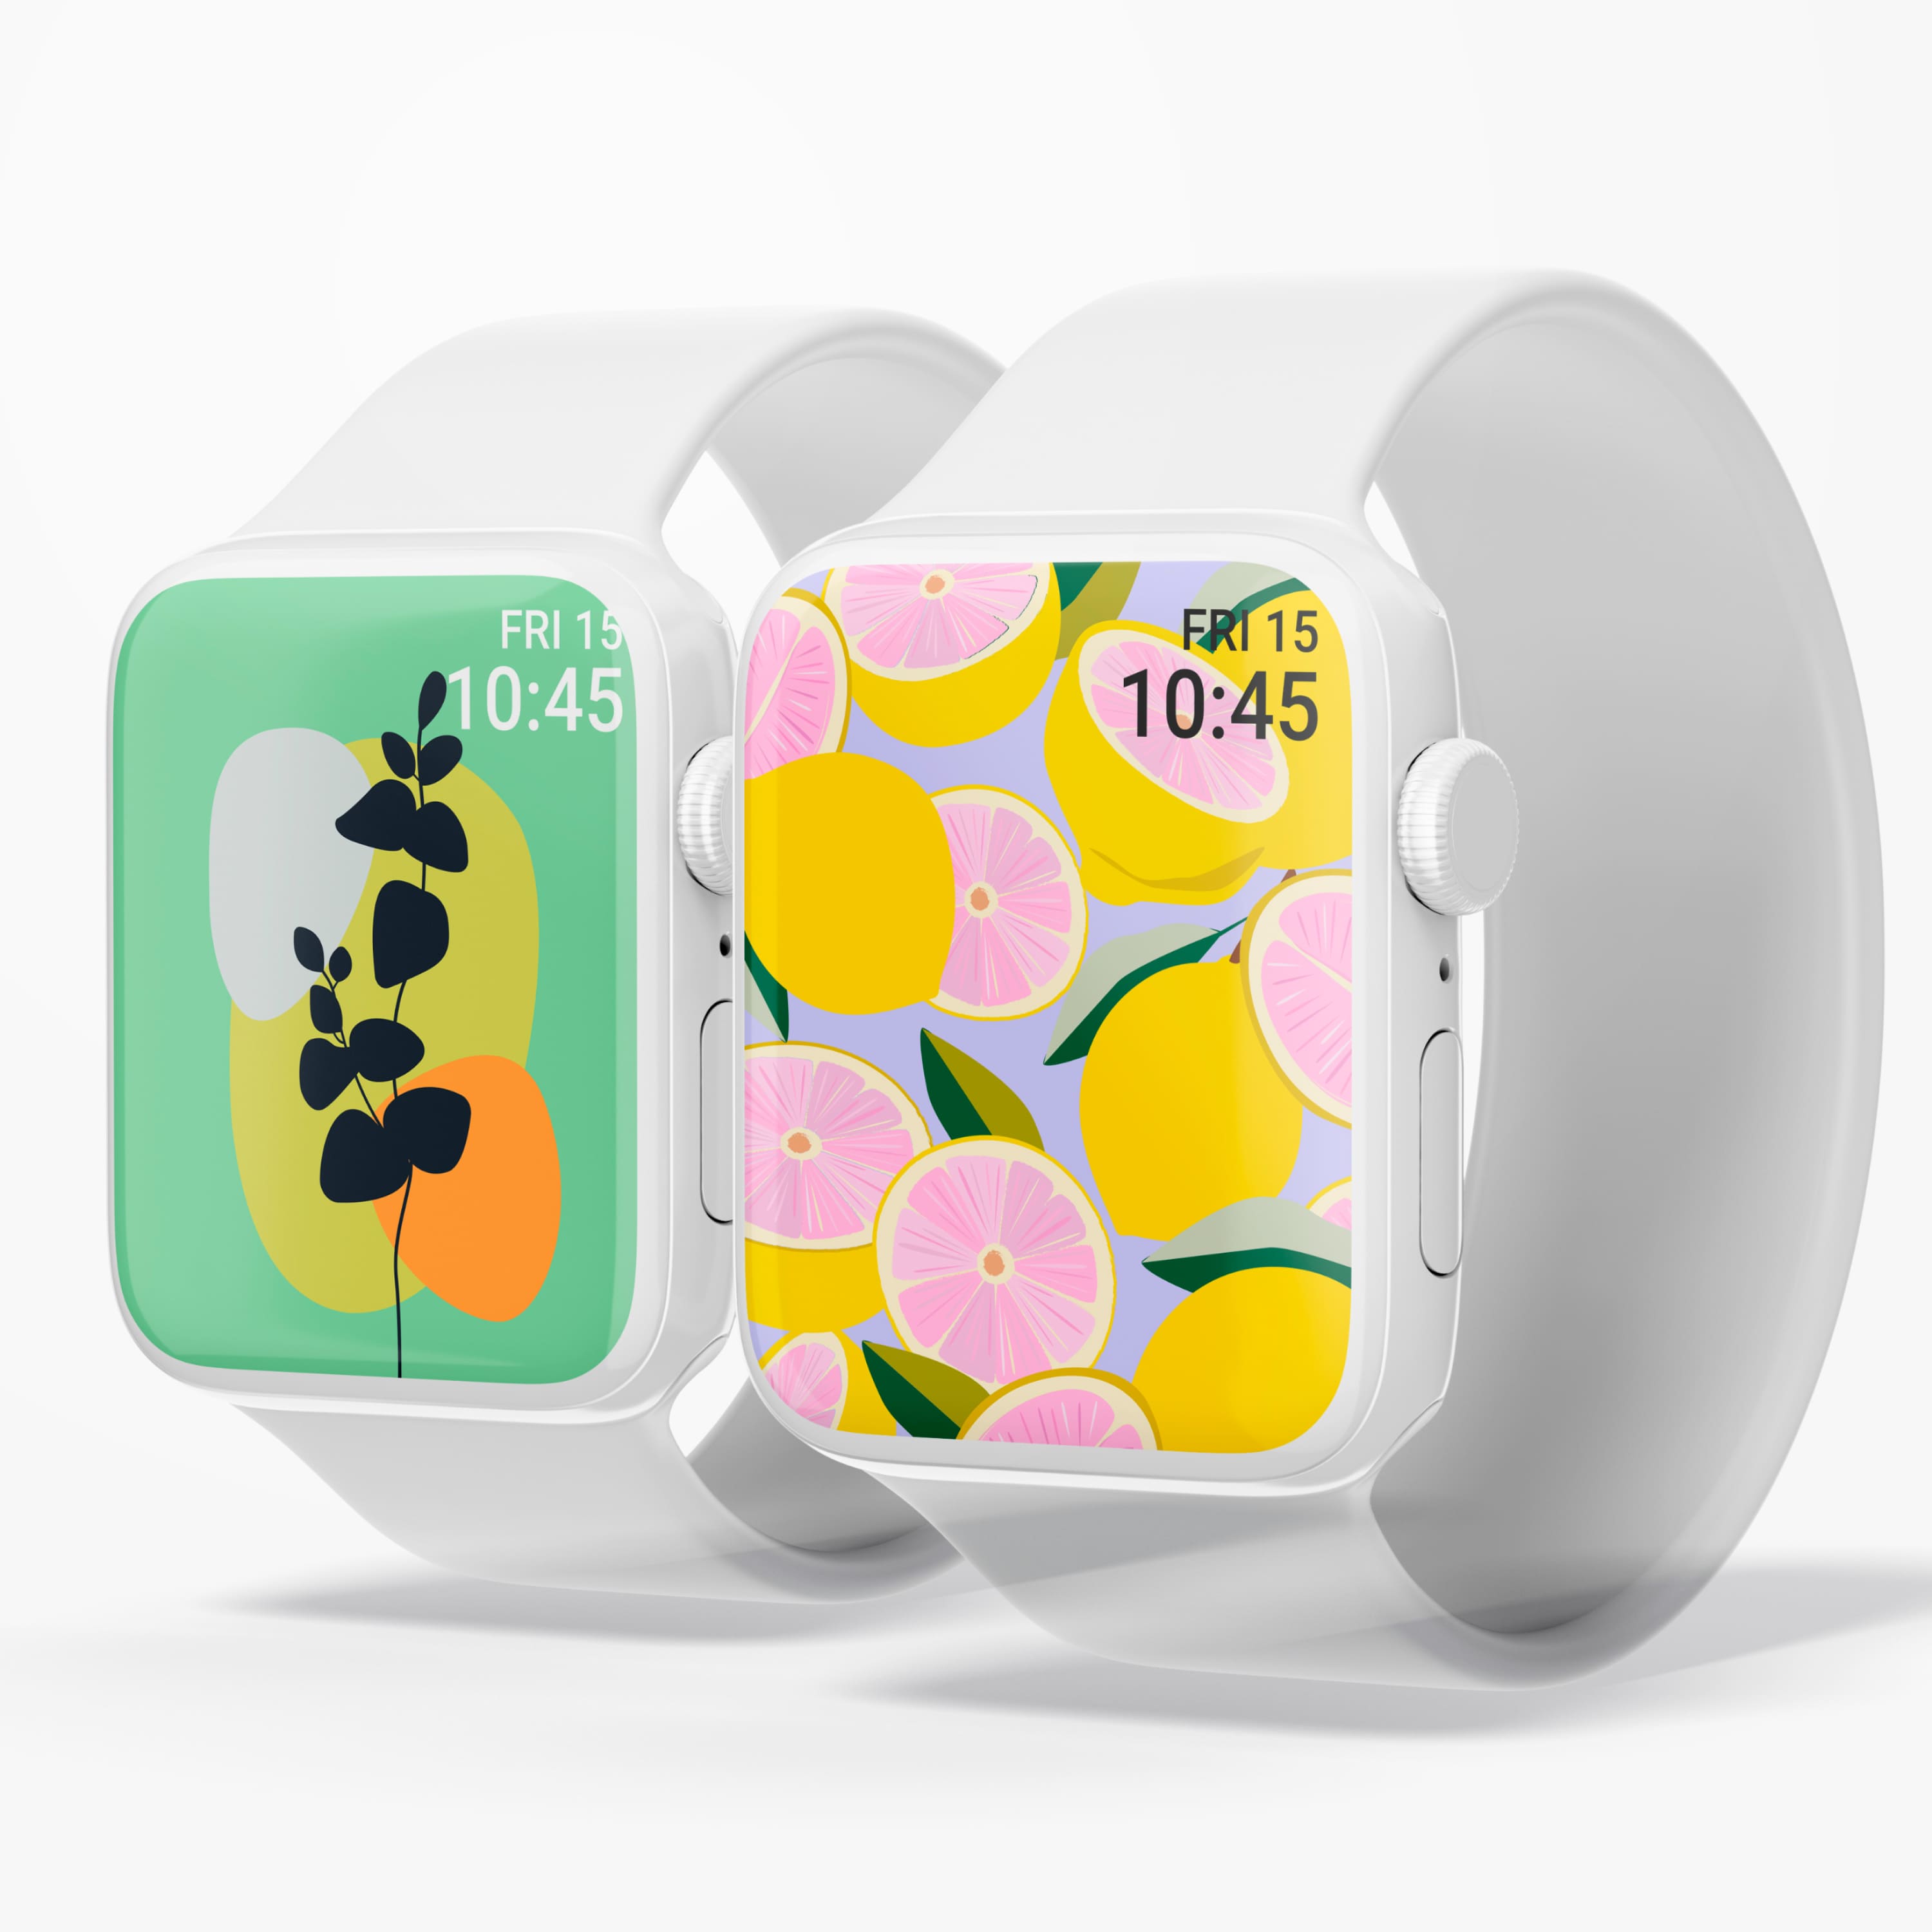 Two aesthetic apple watch with fruits.